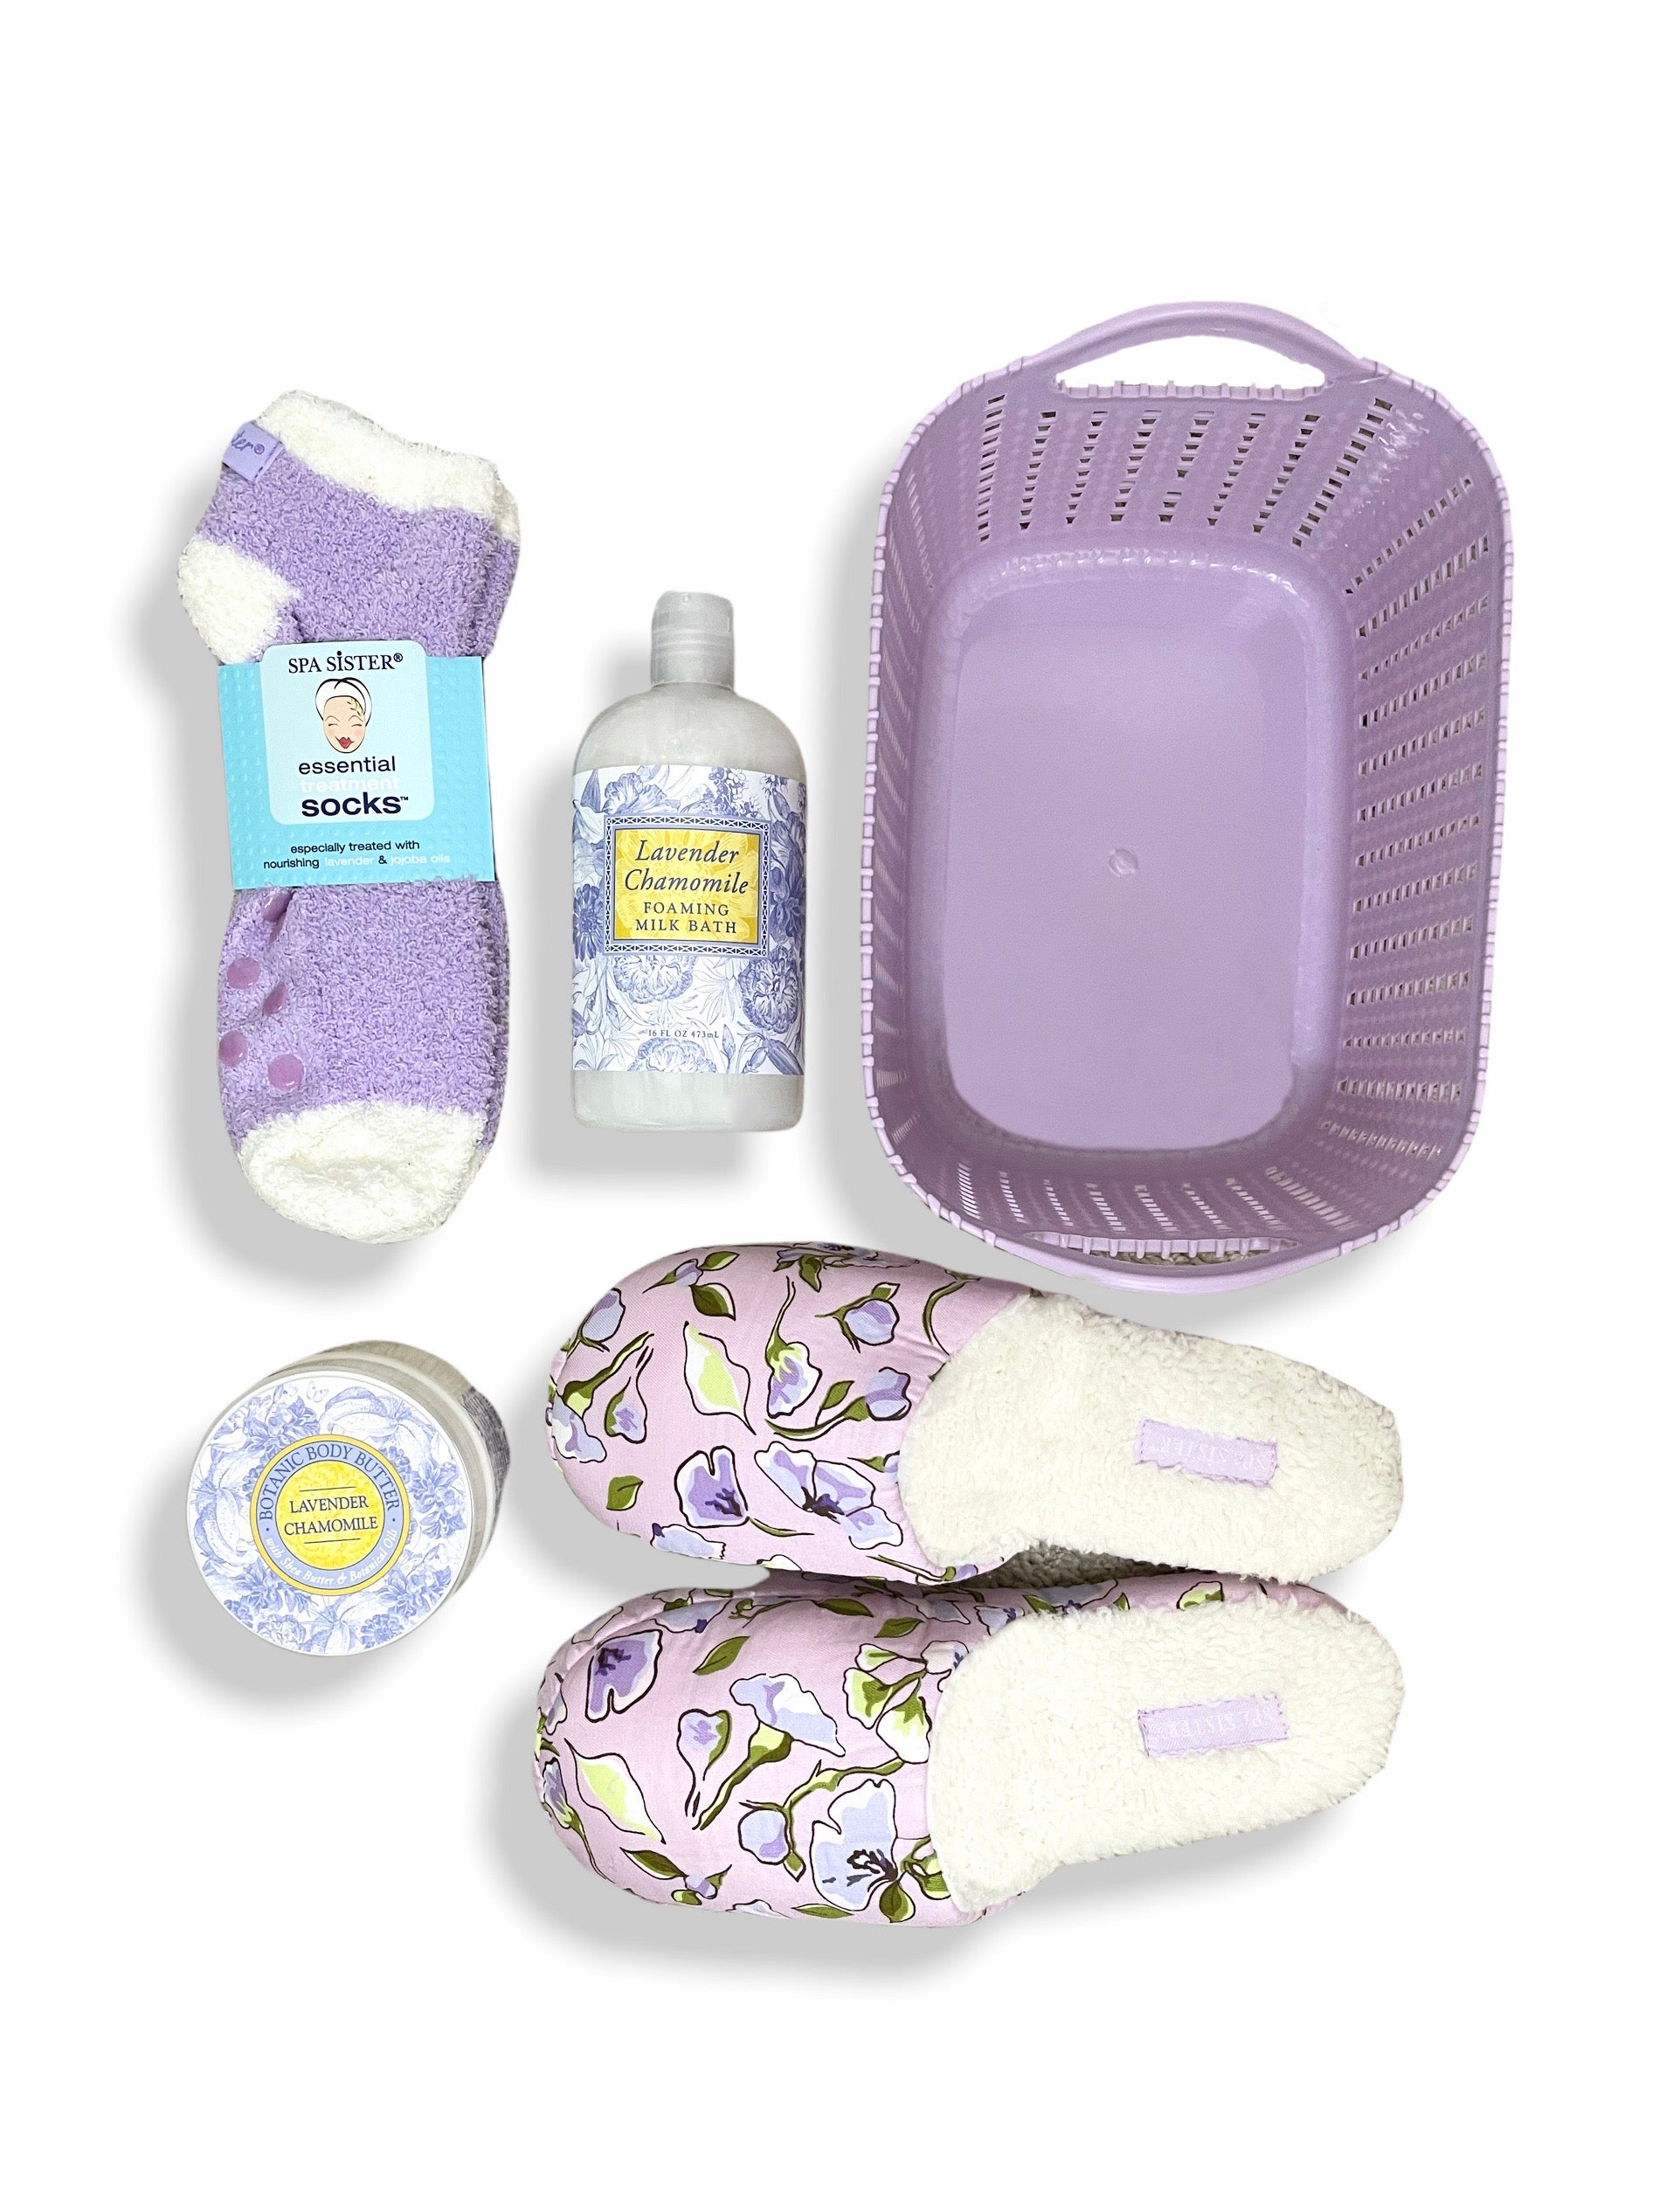 Trilogy Spa Set with Lavender Mimosa